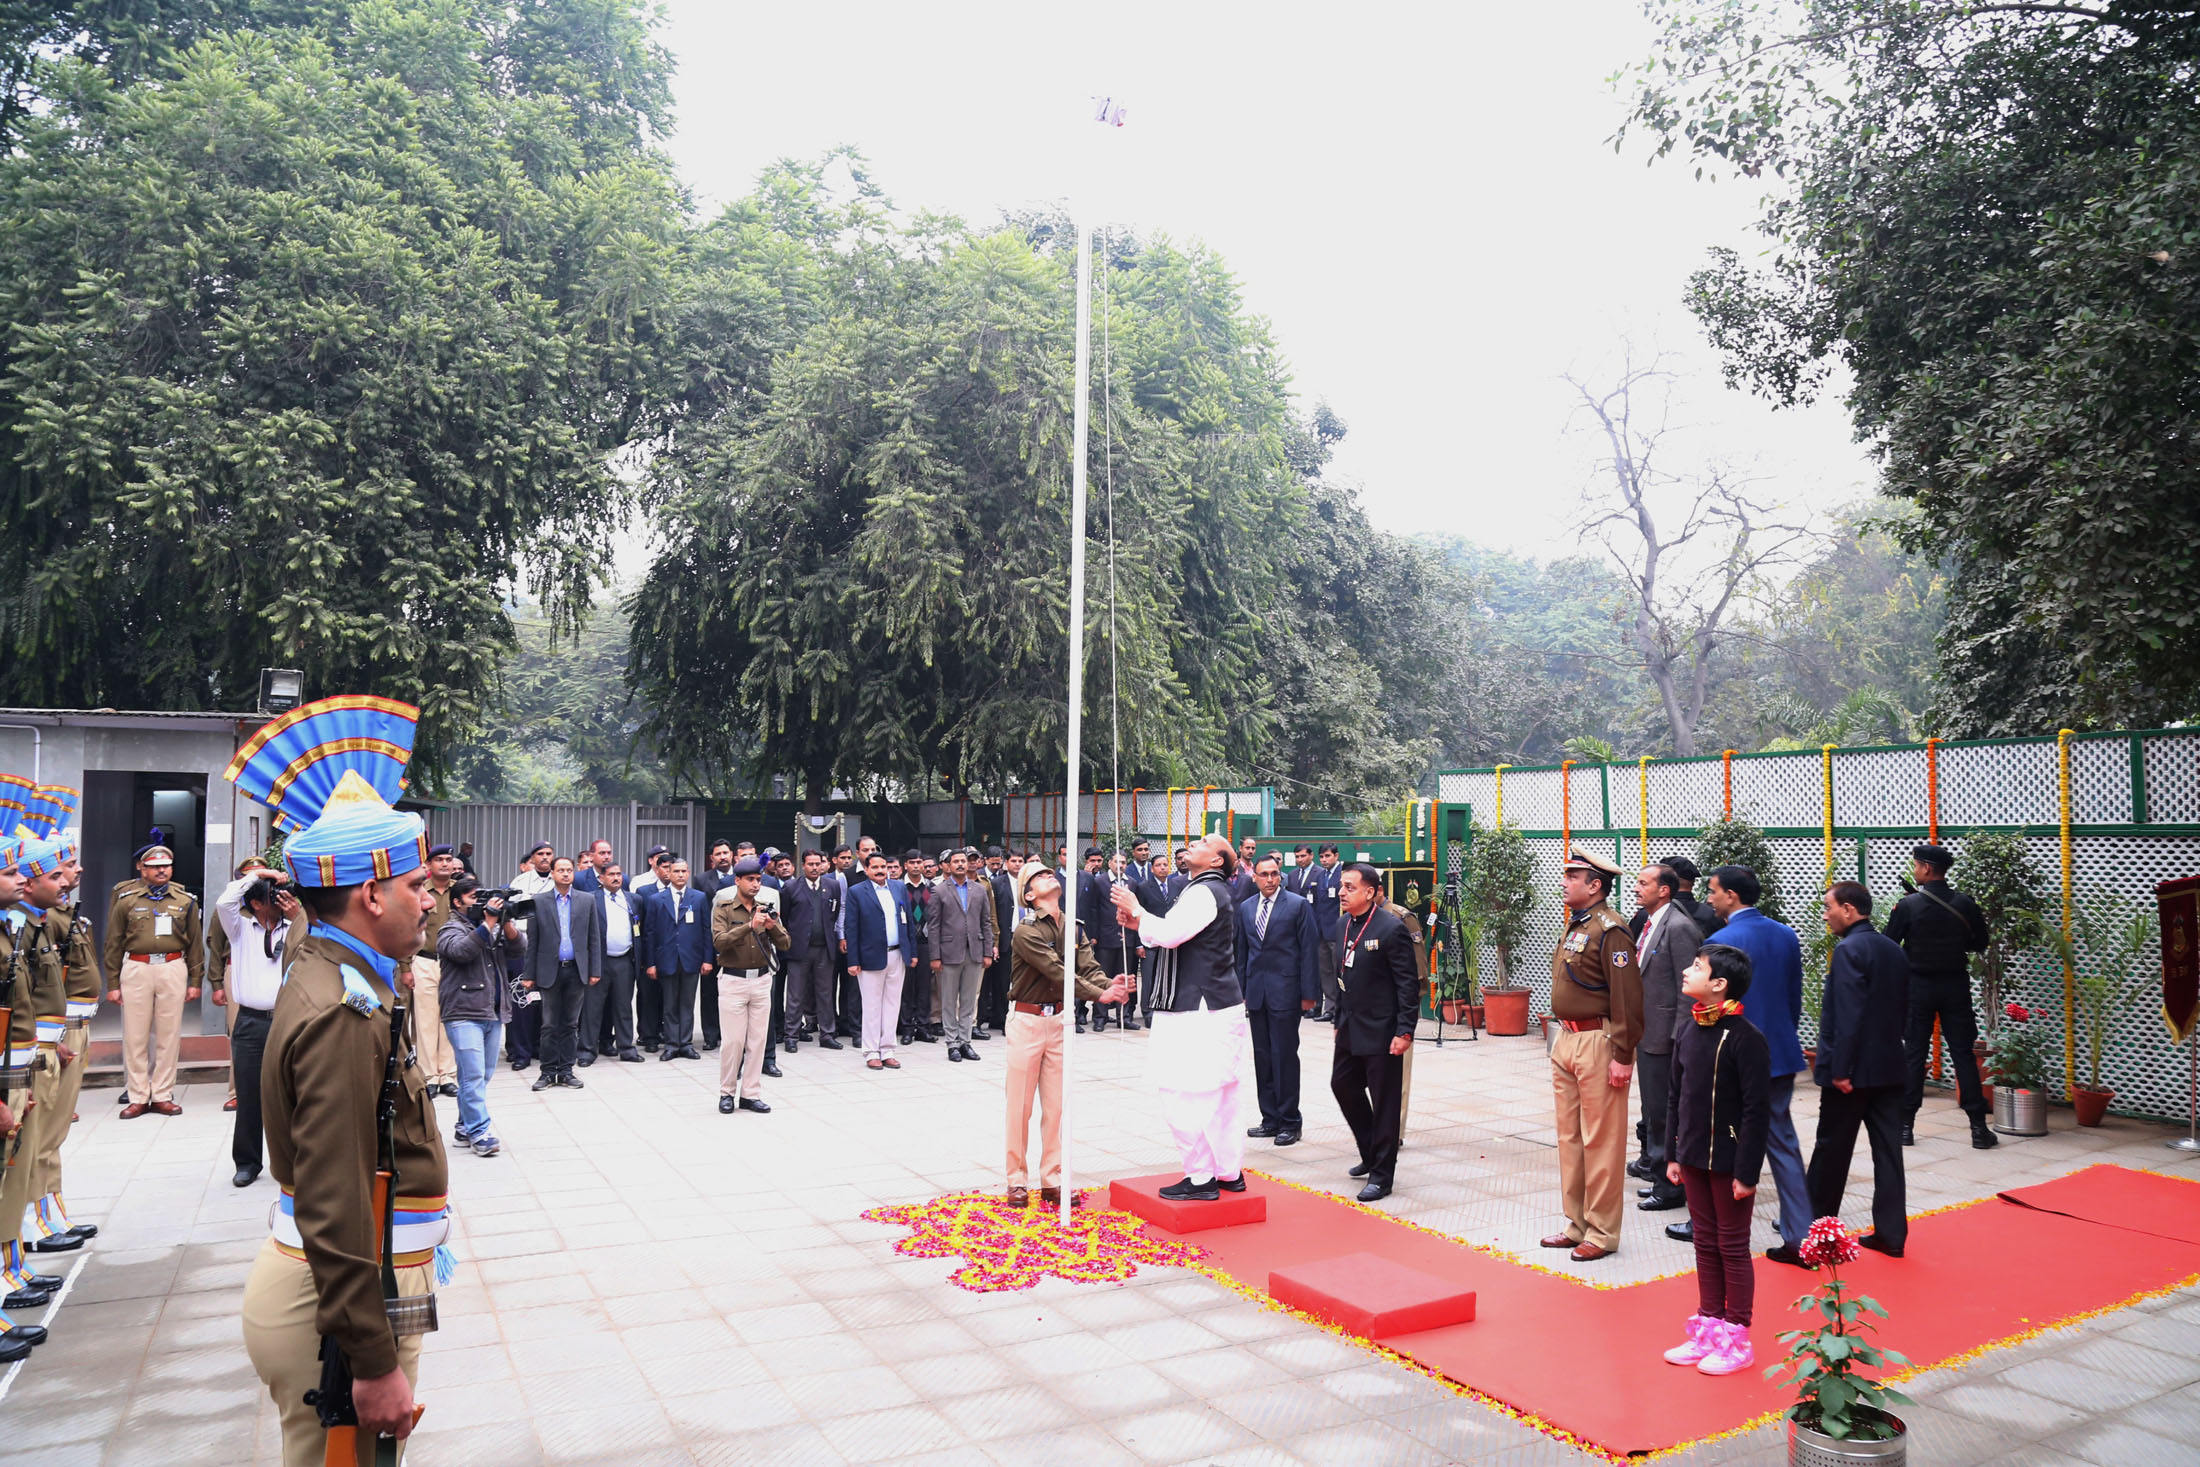 The Union Home Minister, Shri Rajnath Singh unfurling the National Flag, on the occasion of the 68th Republic Day, in New Delhi on January 26, 2017.